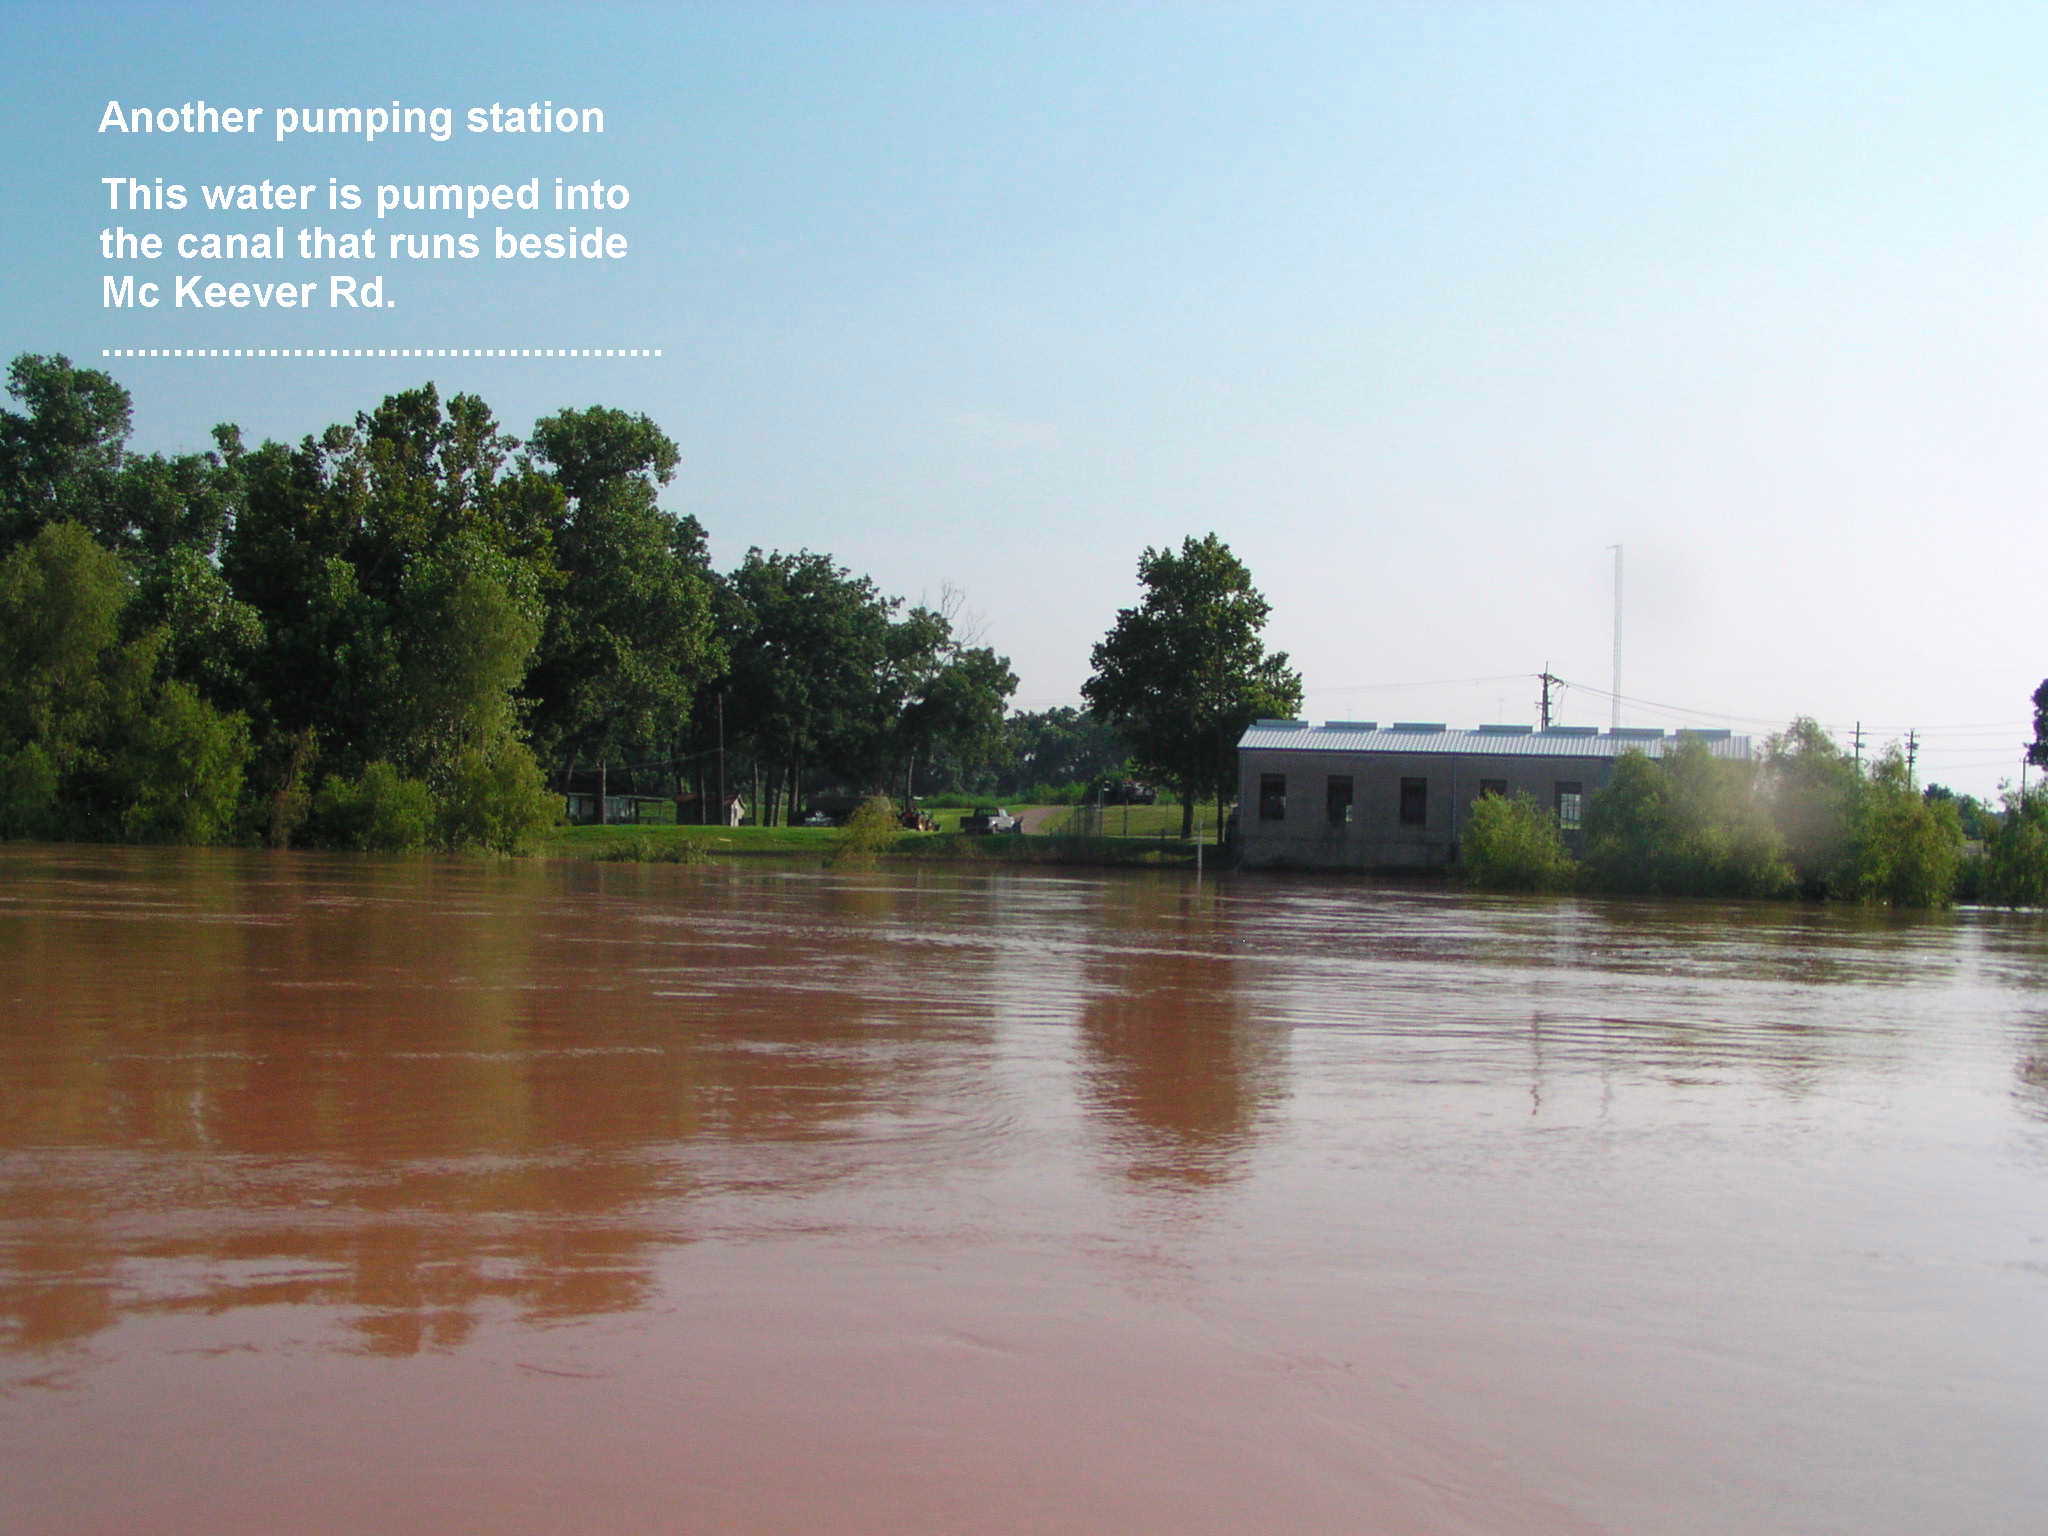 This pumping station is just upstream from Sienna Plantation.